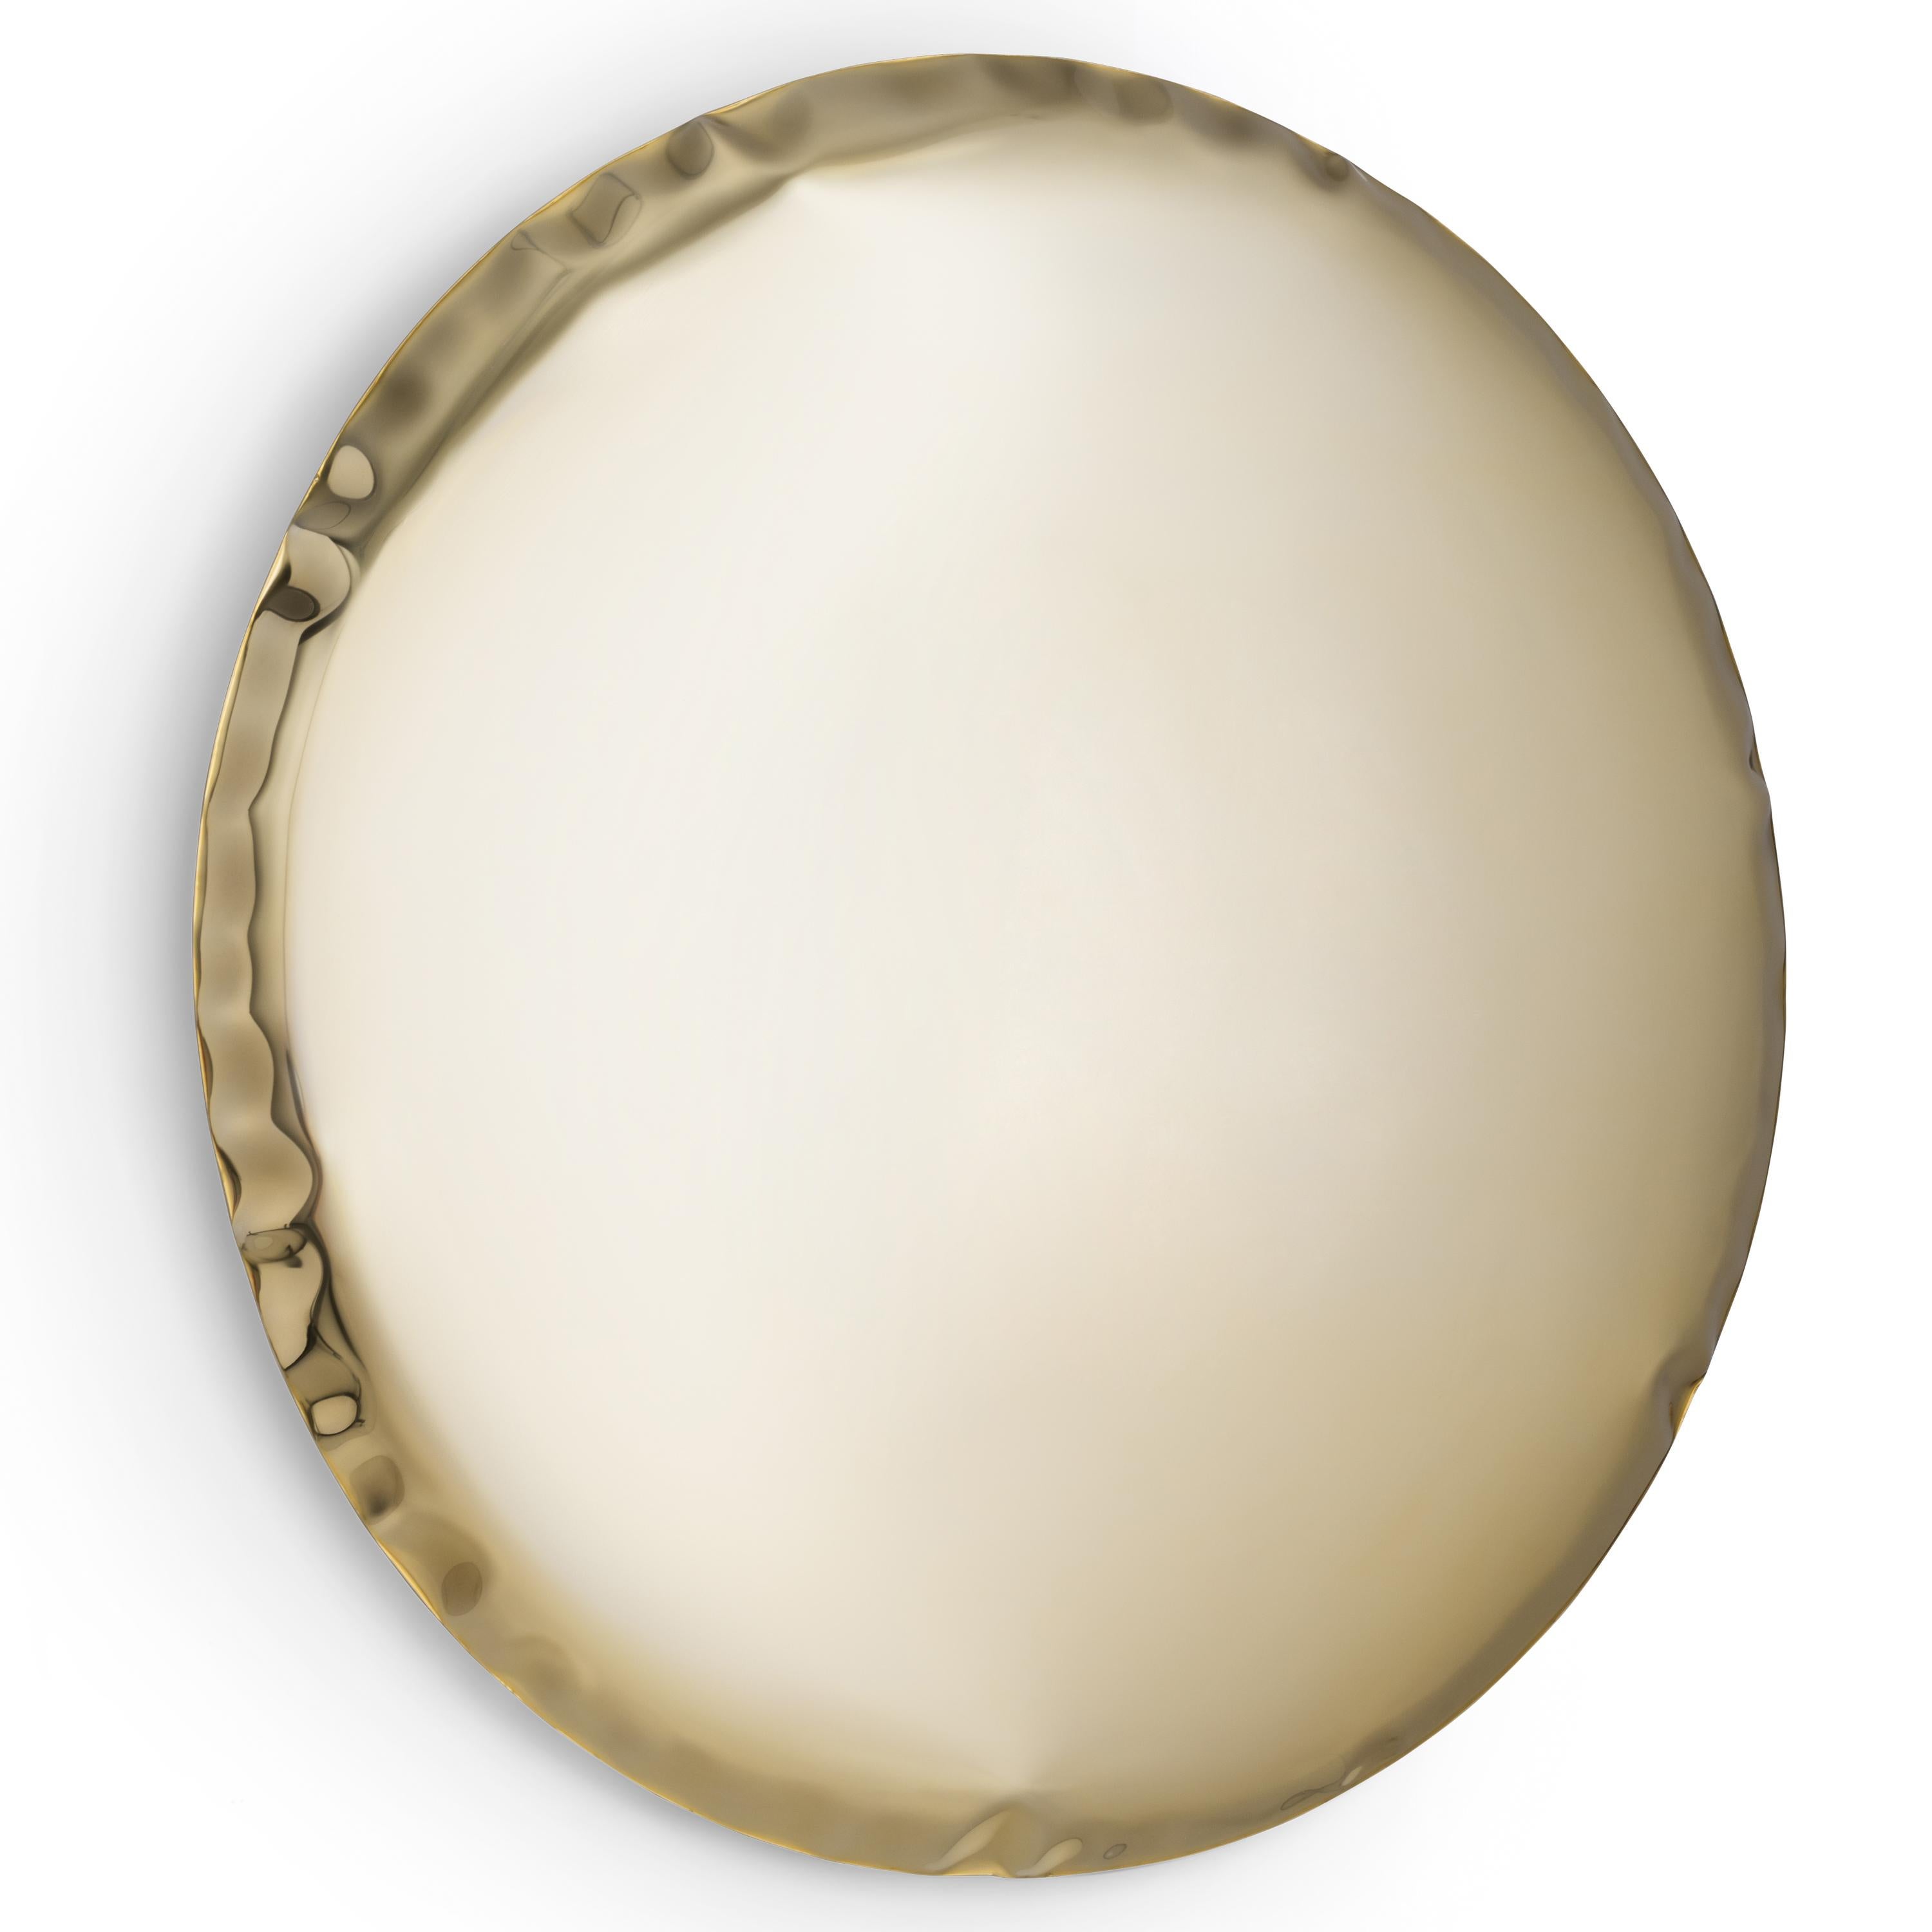 OKO 120 by Zieta
Original mirror by Zieta, delivered with certificate. 

Collection: AURUM

120cm
Polished stainless steel
Finish: Light gold

--
Zieta Studio is a brand established in 2010 by Oskar Zieta – an architect and innovator,